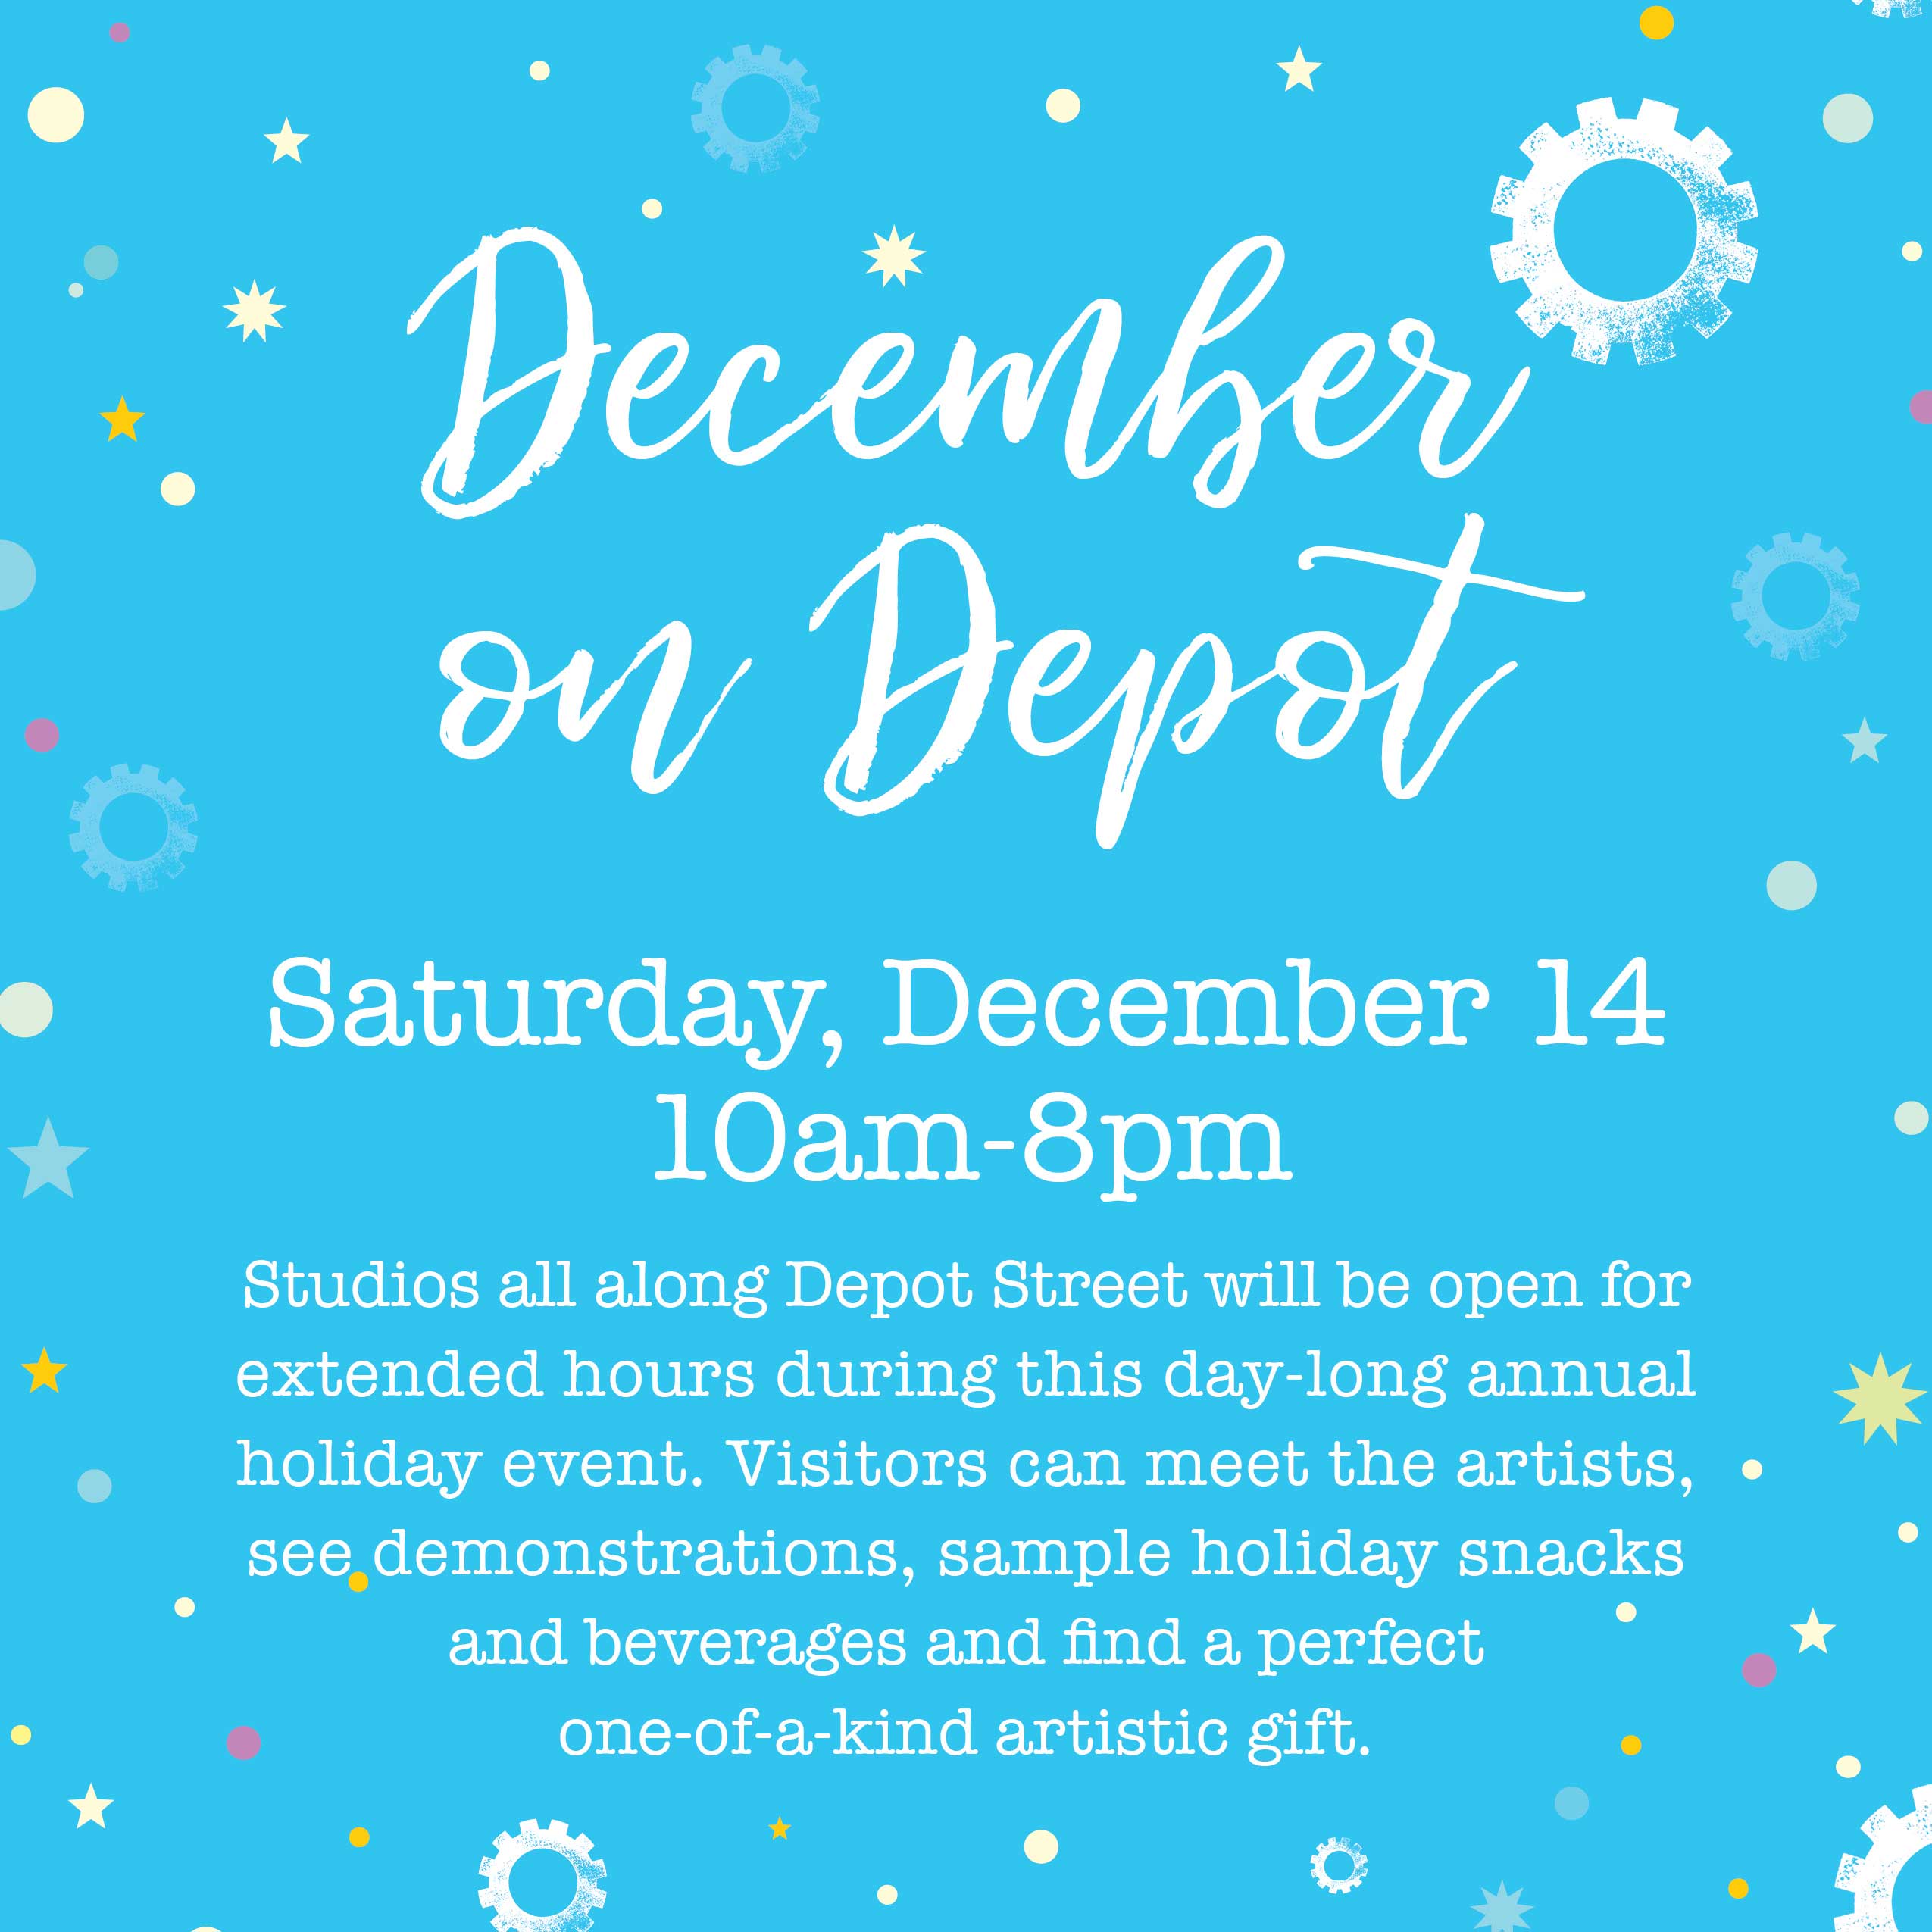 December on Depot in the River Arts District flyer